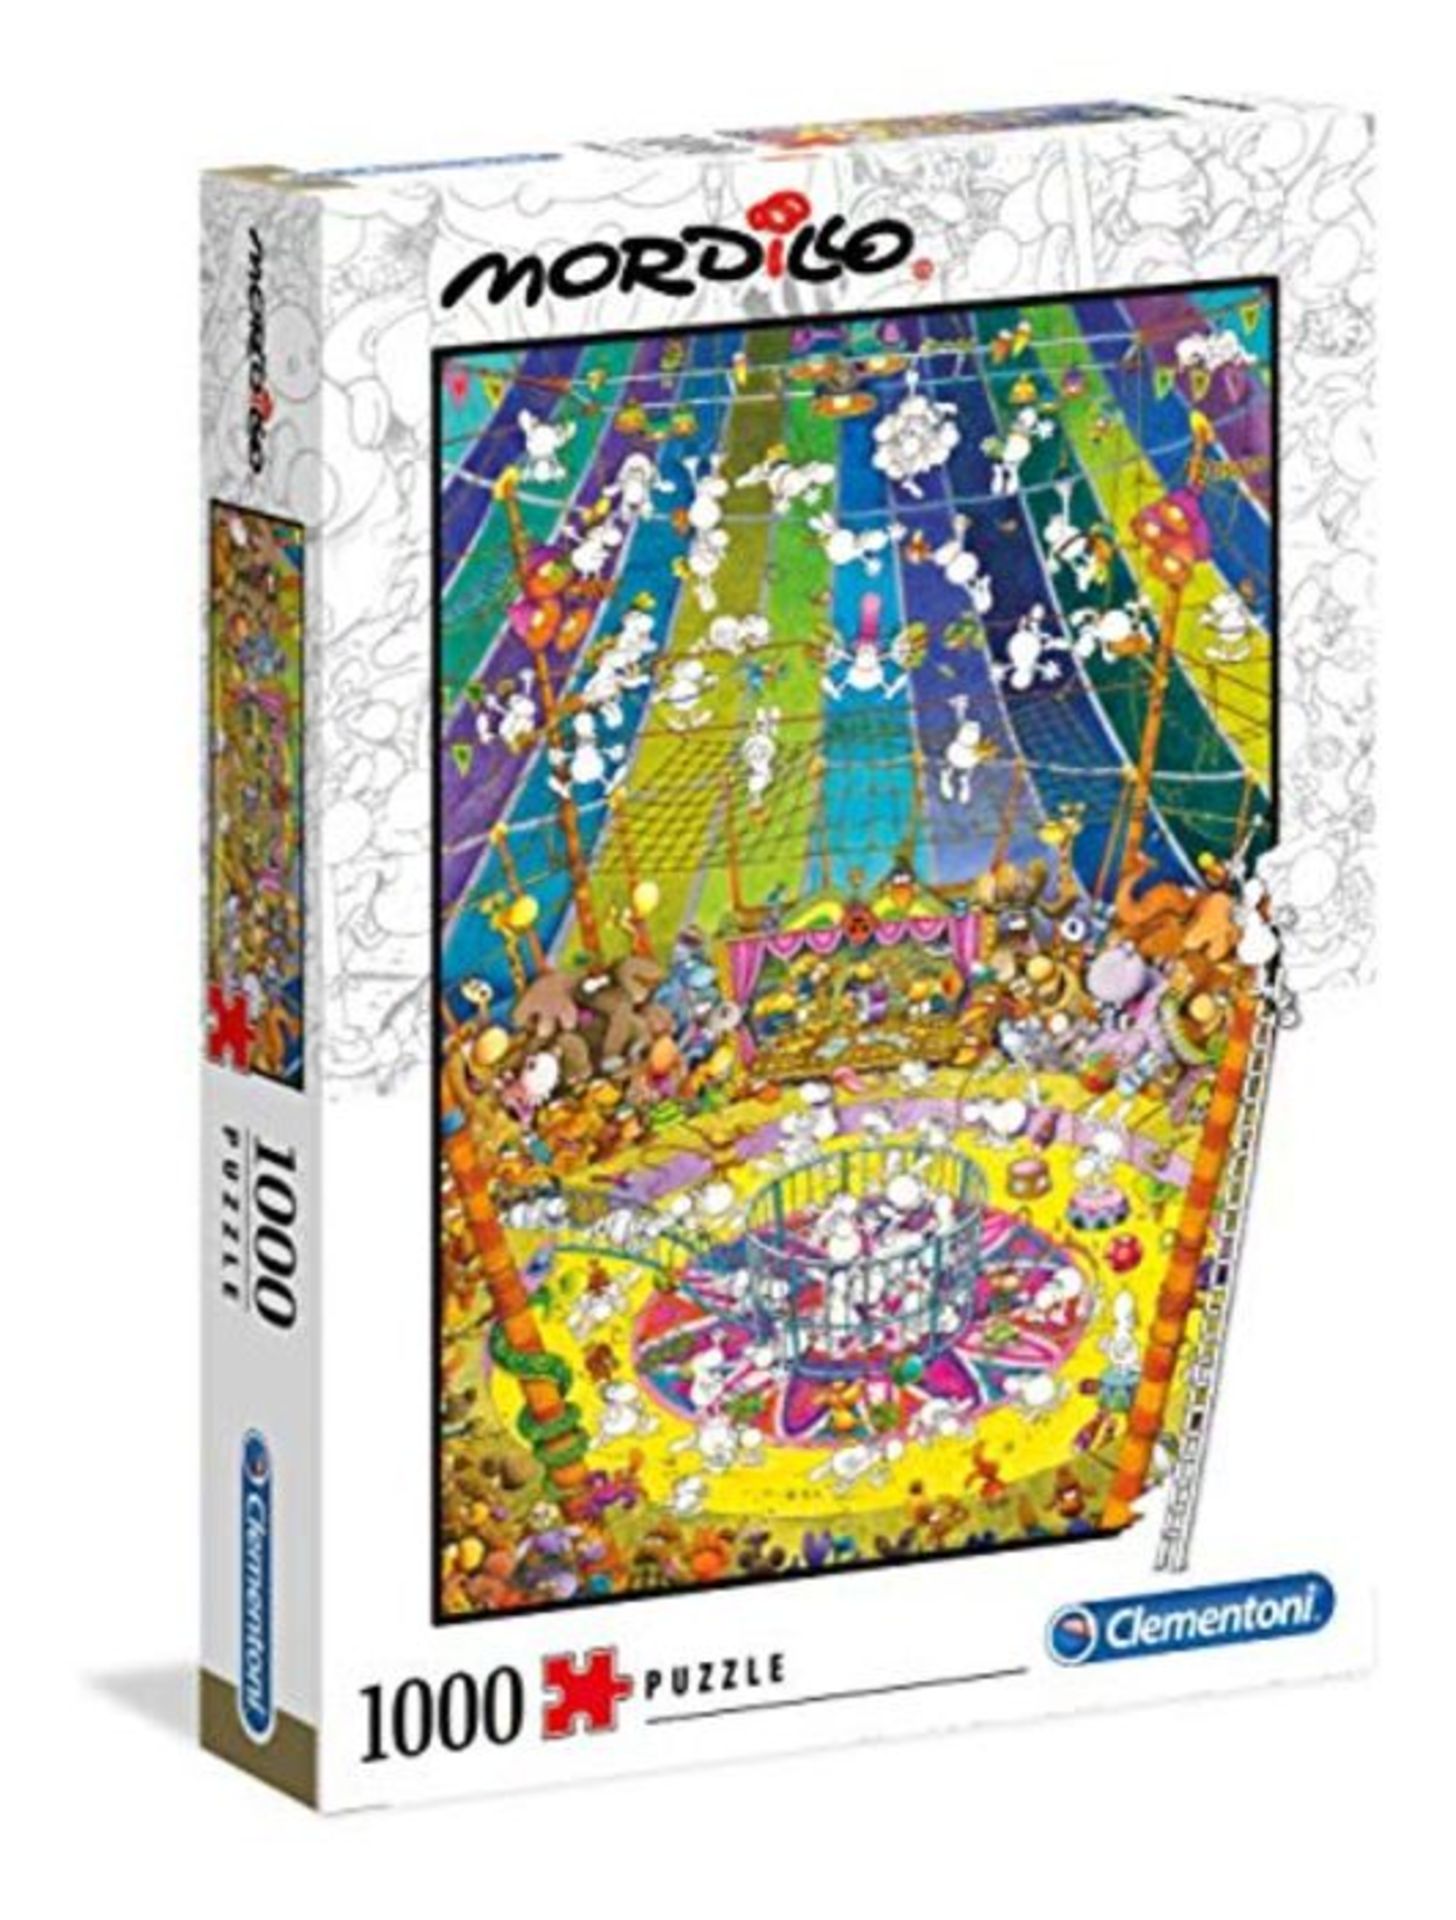 Clementoni - 39536 - Mordillo Puzzle - The Show - 1000 pieces - Made in Italy - jigsaw